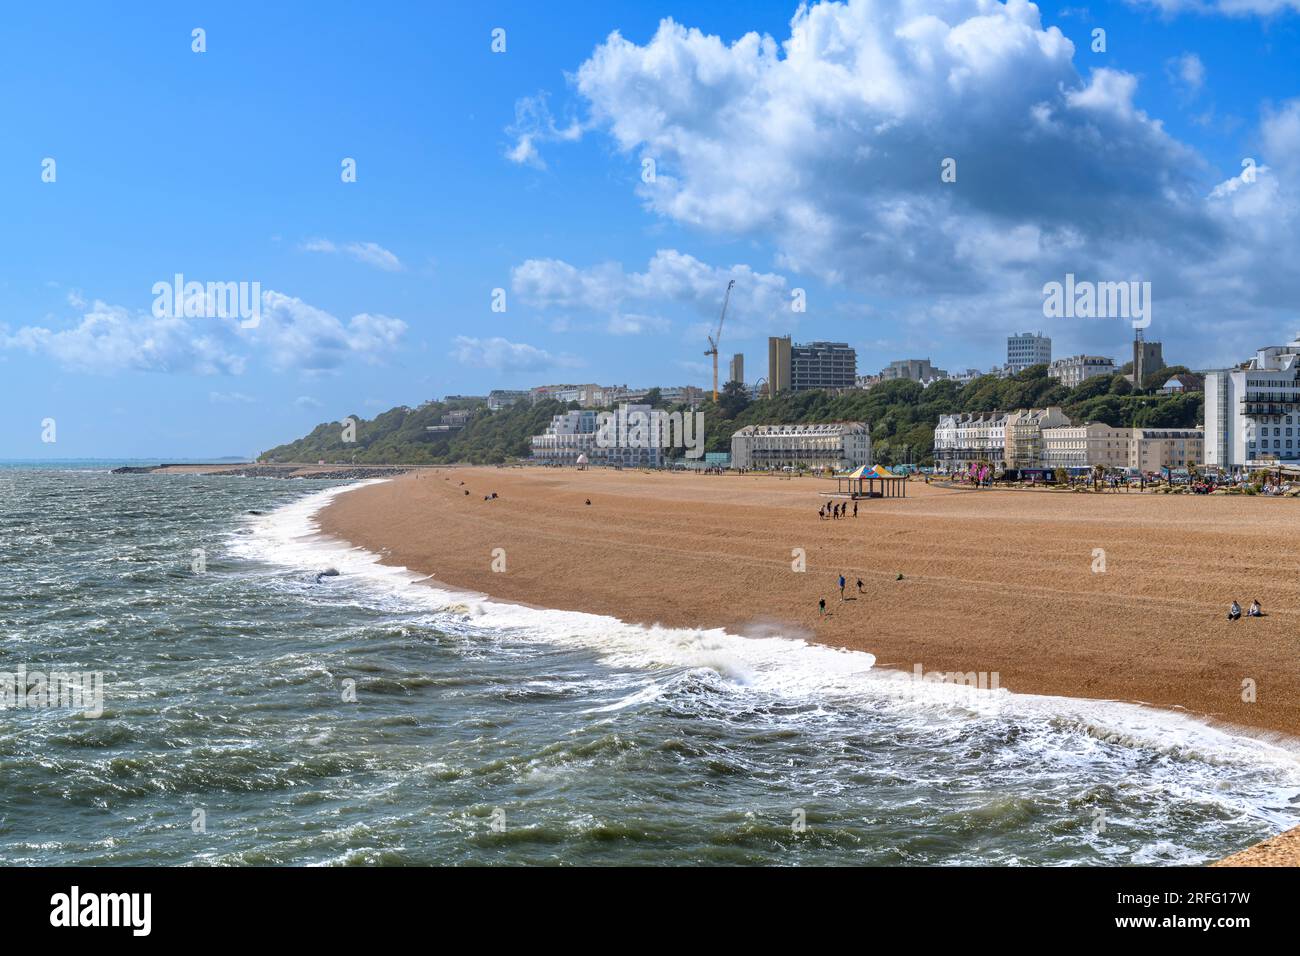 Mermaid Beach / Folkestone Beach. With pebble beach and rough sea on a windy day. Shot taken from the Harbour Arm - high above the sea. Stock Photo